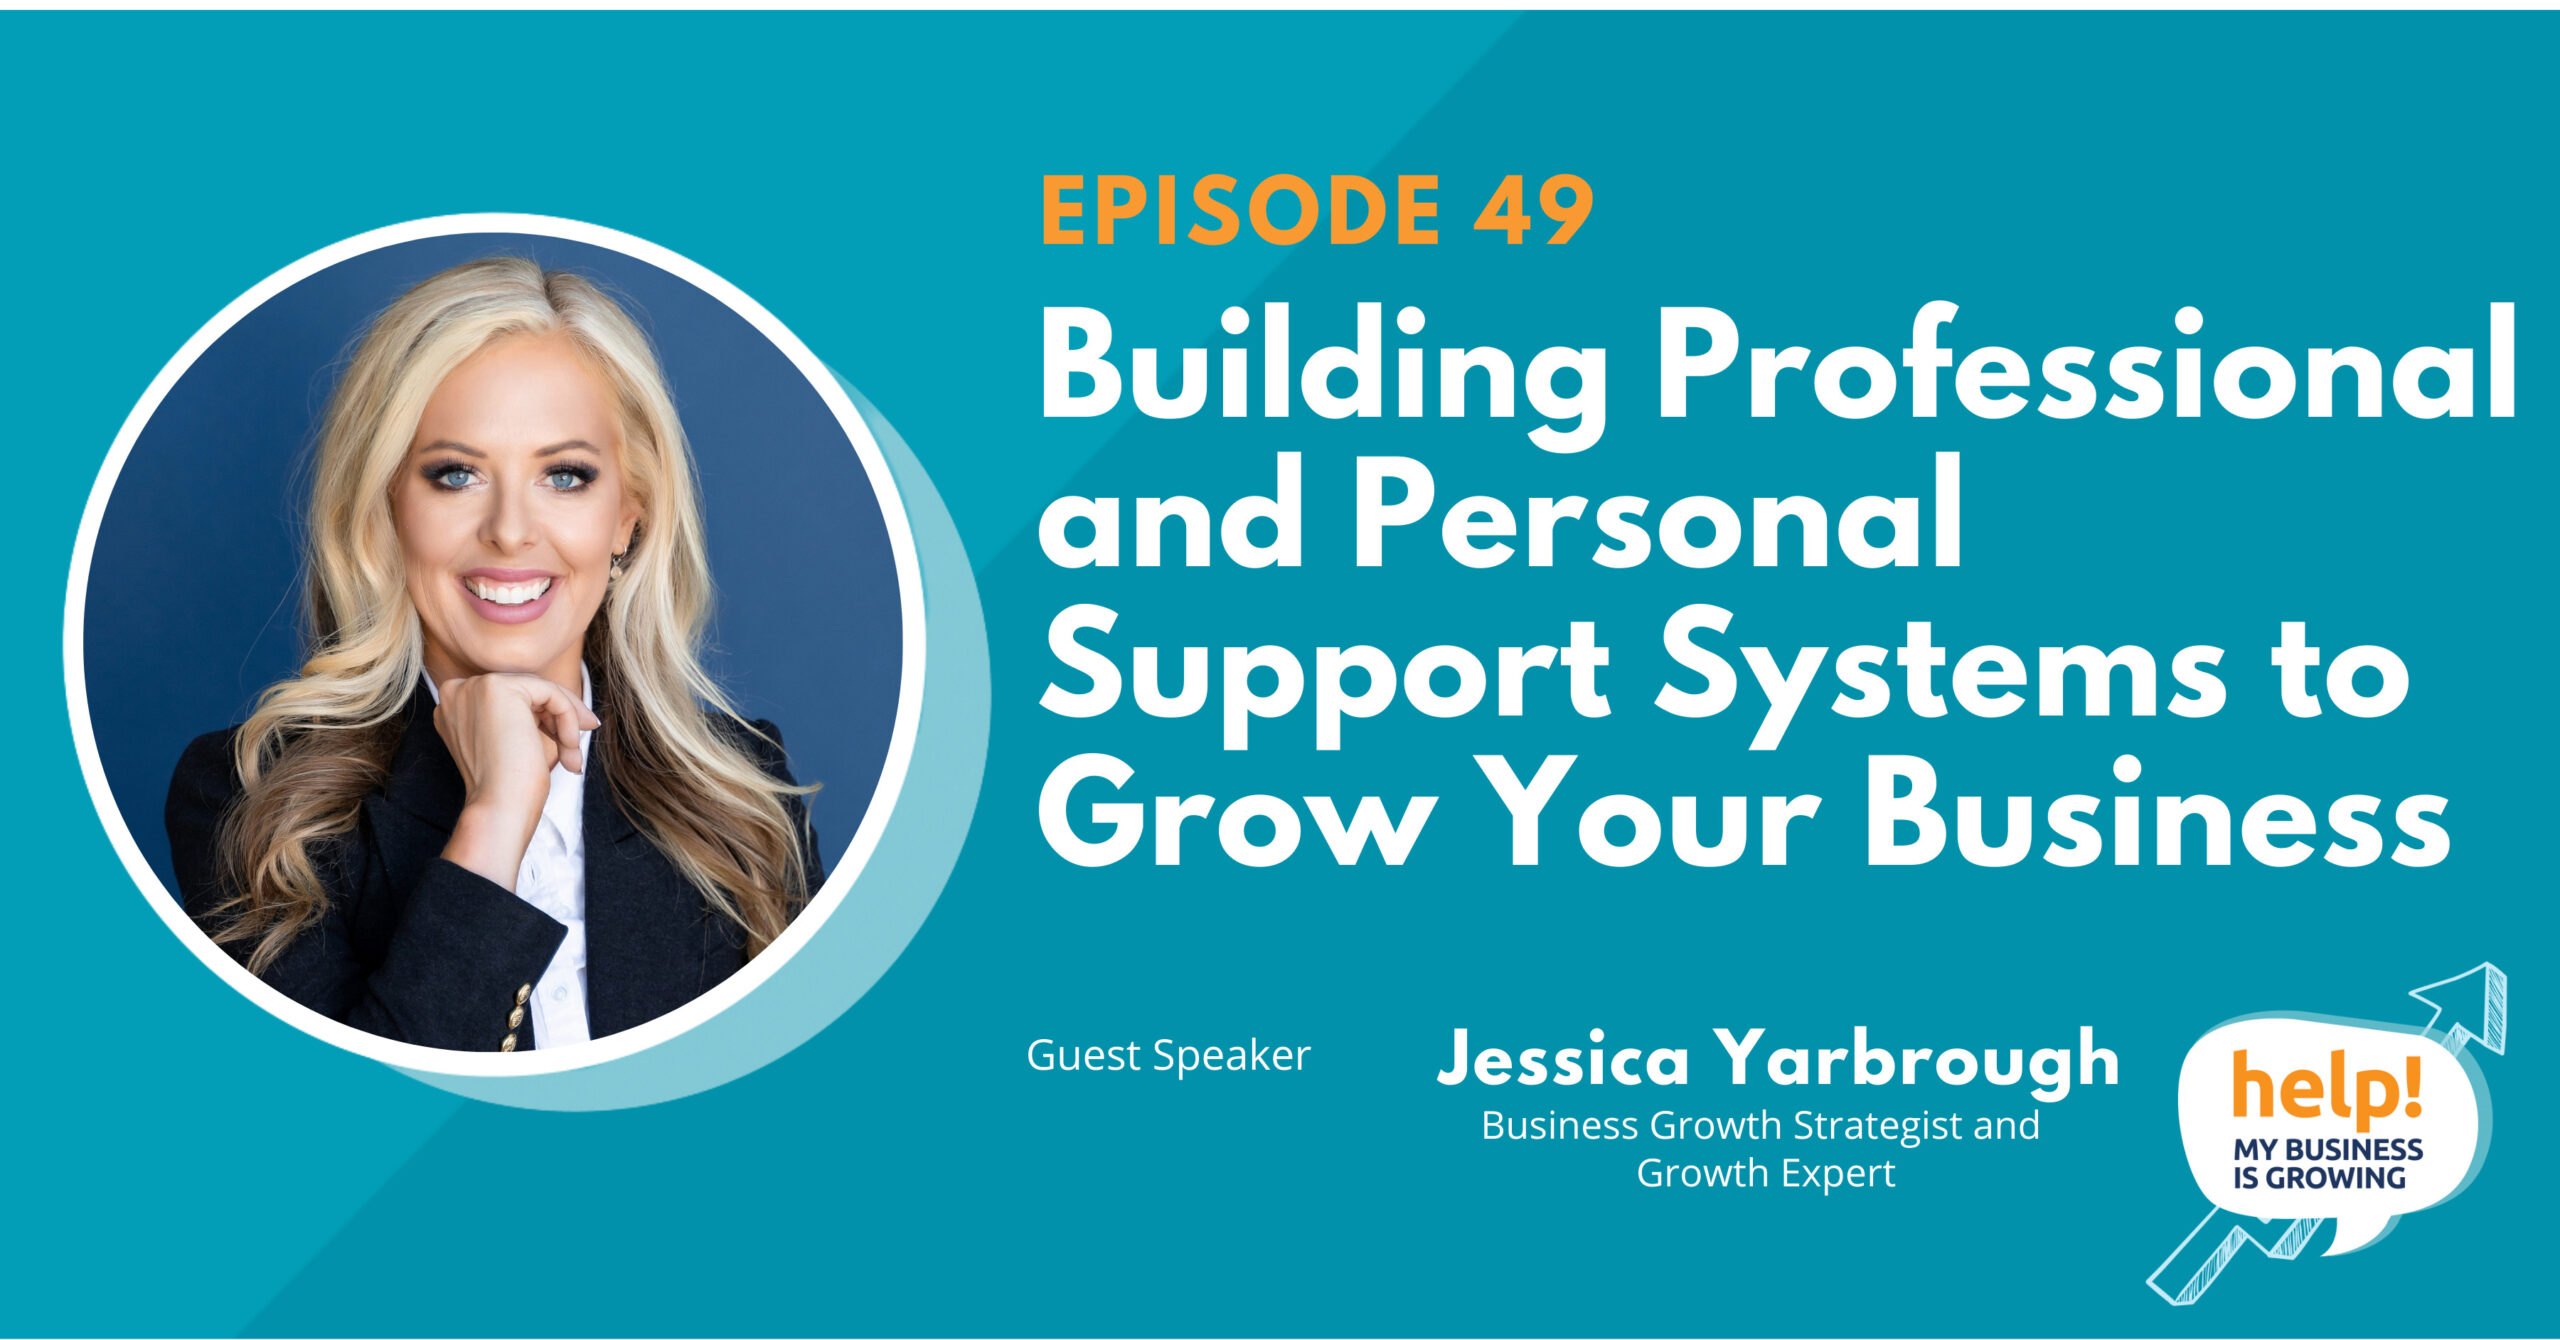 Building Professional and Personal Support Systems to Grow Your Business